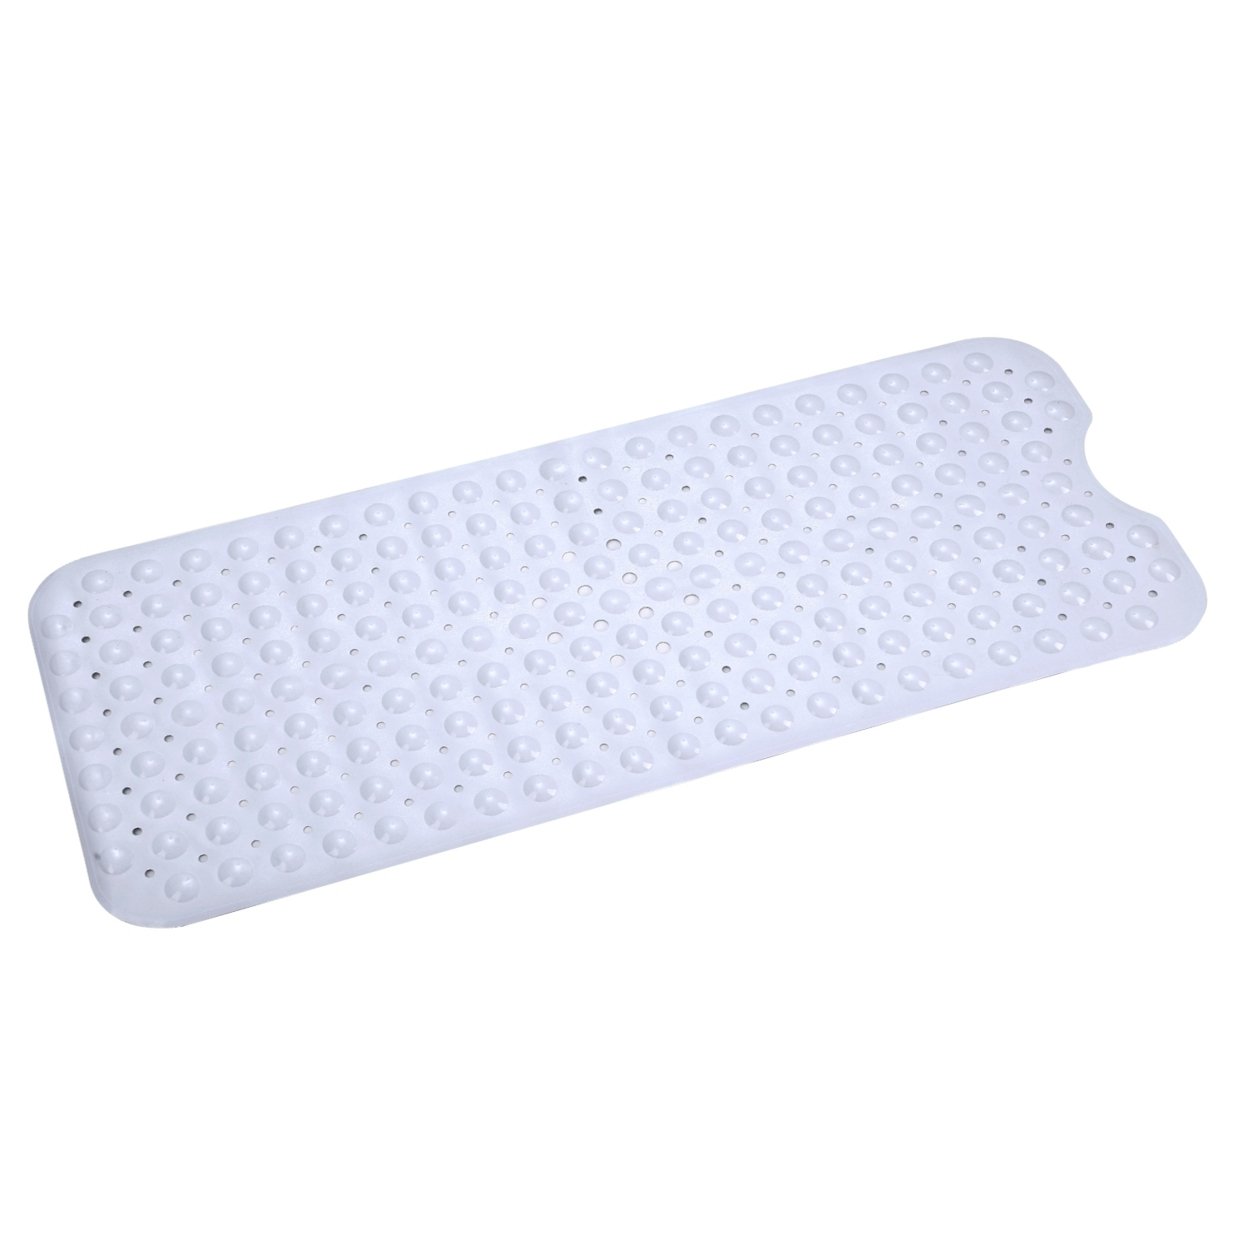 Global Phoenix Bath Tub Mat Non-Slip Shower Mat with Suction Cups Washable for Bathroom Kitchen Pool